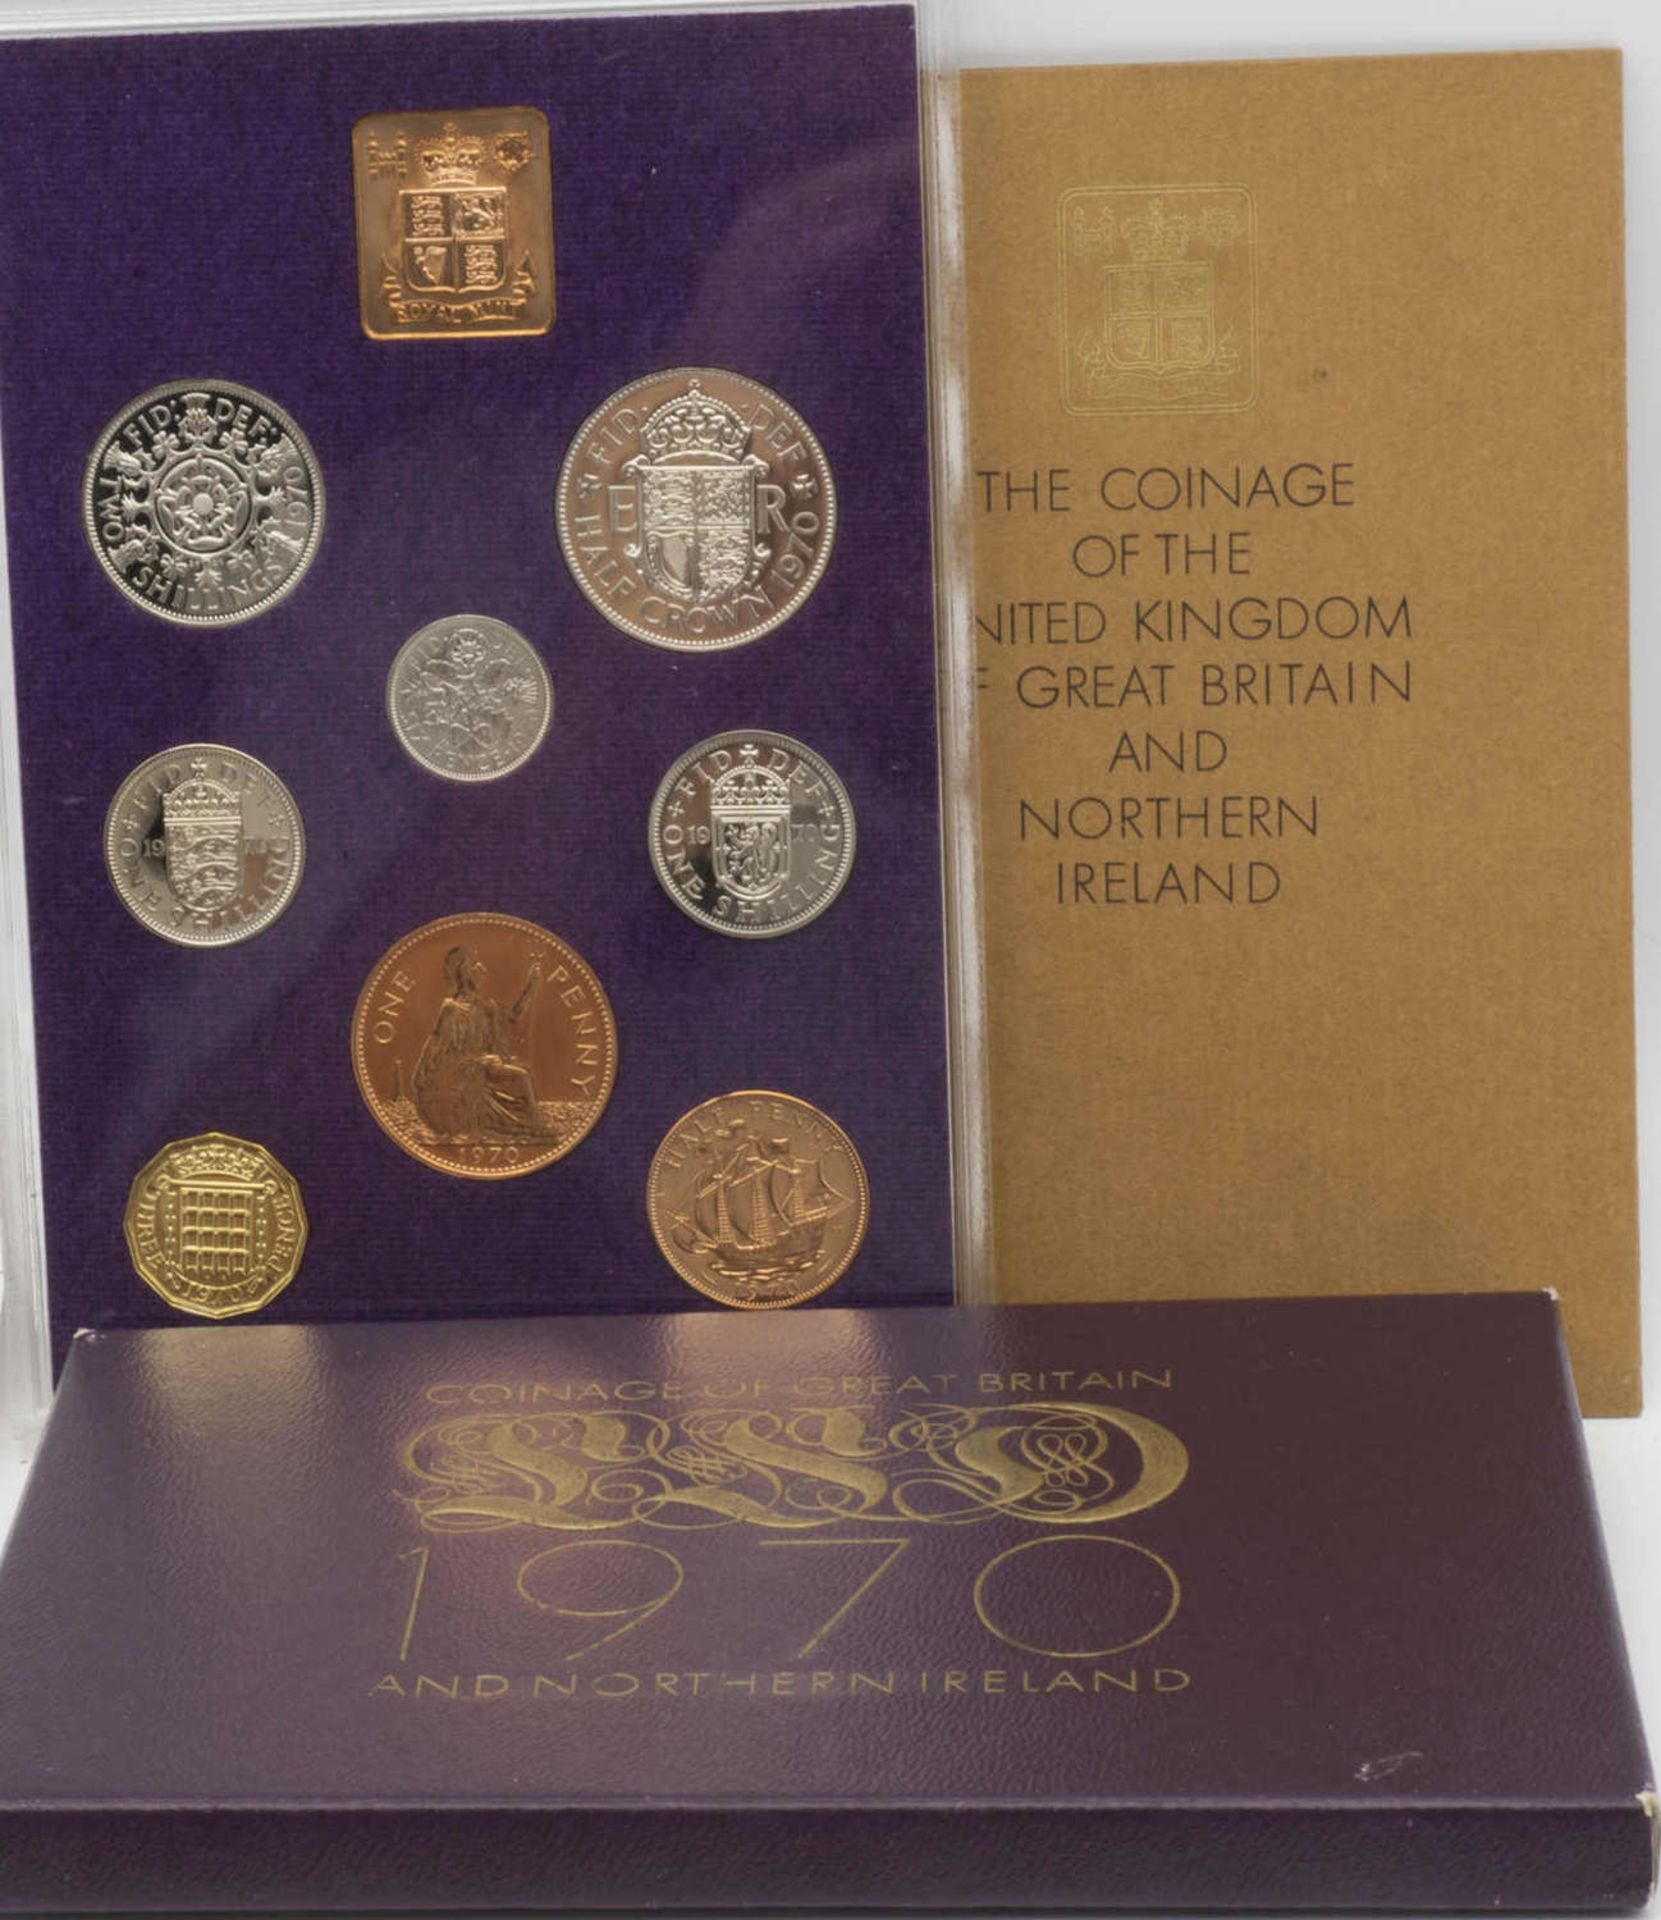 England and Northern Ireland, set of coins in 1970. Original in Folder. mirror finish